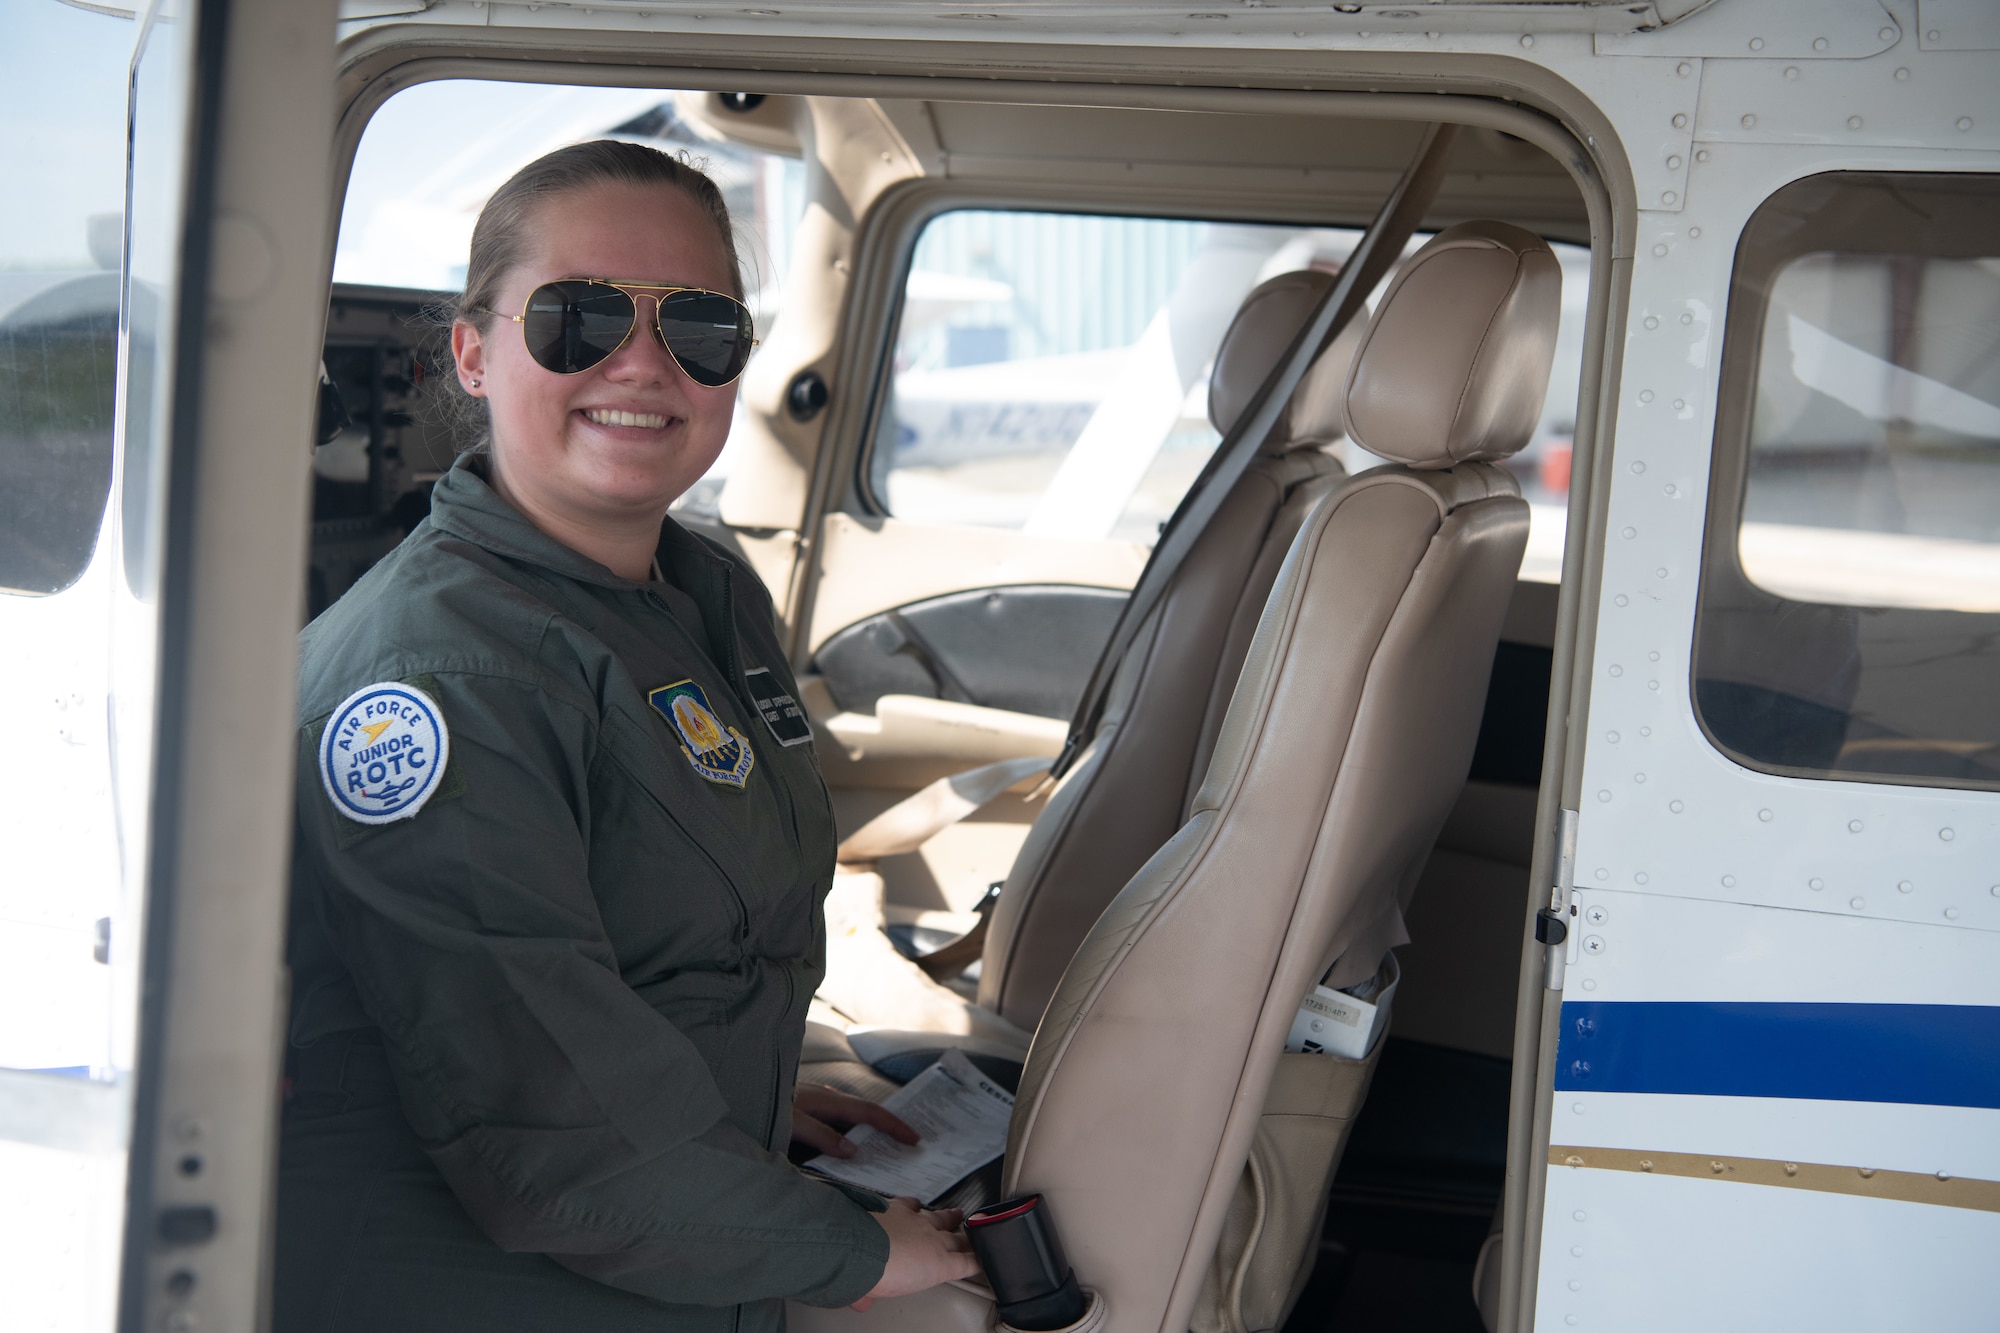 Air Force Cadet Lochli Stephenson, poses for a photo at Salisbury, Maryland, August 10, 2022. Stephenson talked about how the Junior Reserve Officer Training Corps not only got her pilot's license but boosted her confidence to speak in public and has just supported her overall.